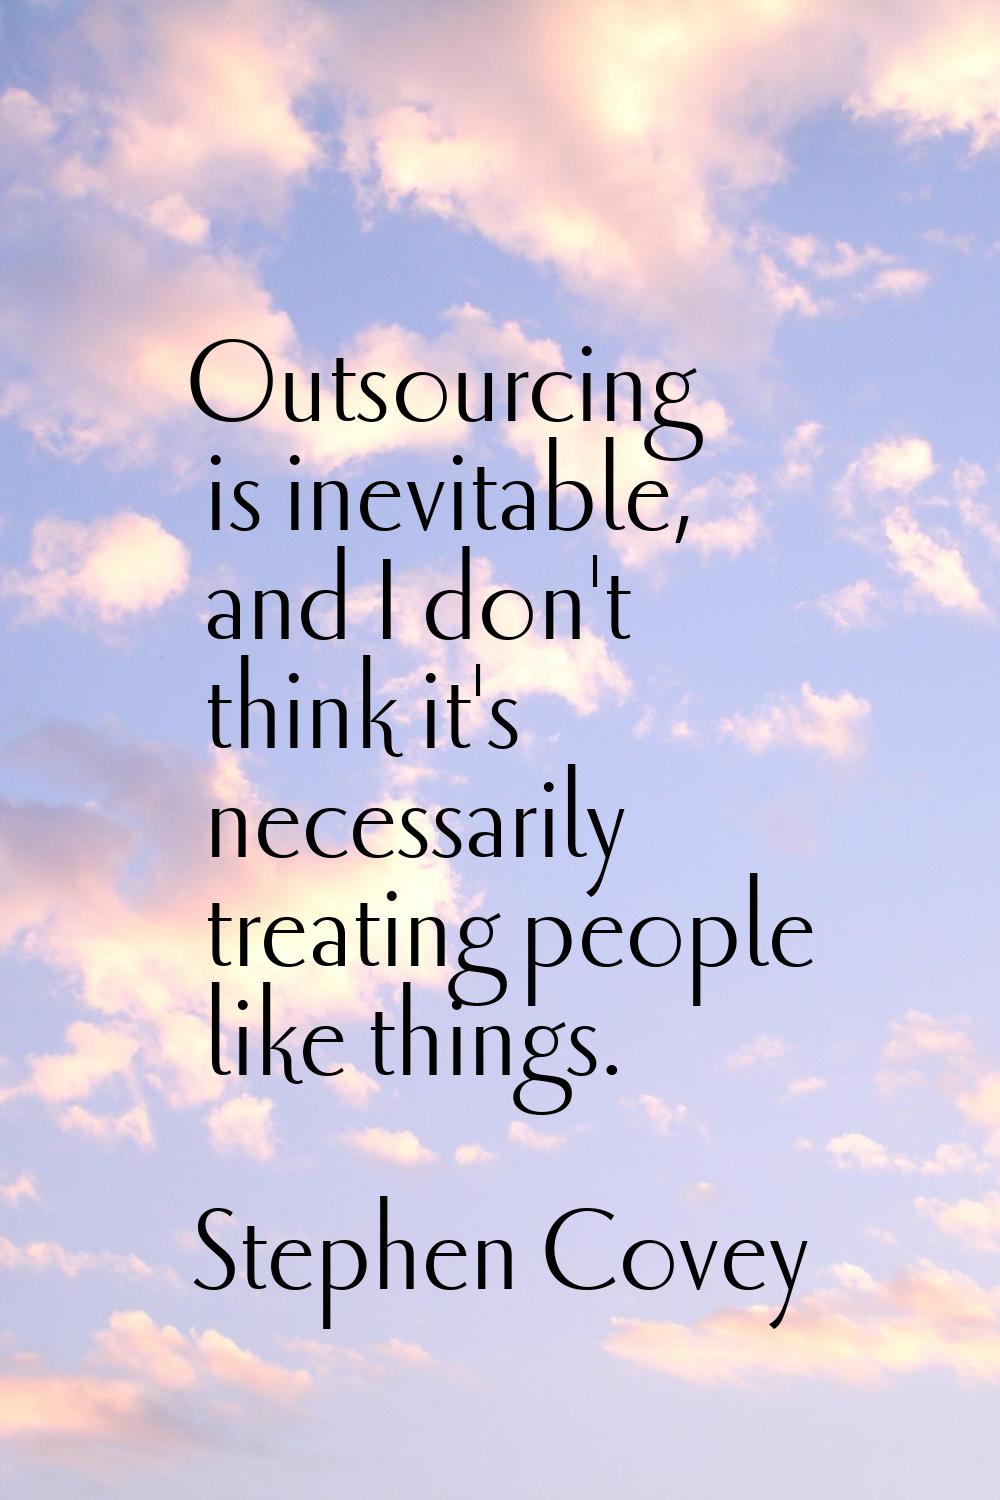 Outsourcing is inevitable, and I don't think it's necessarily treating people like things.